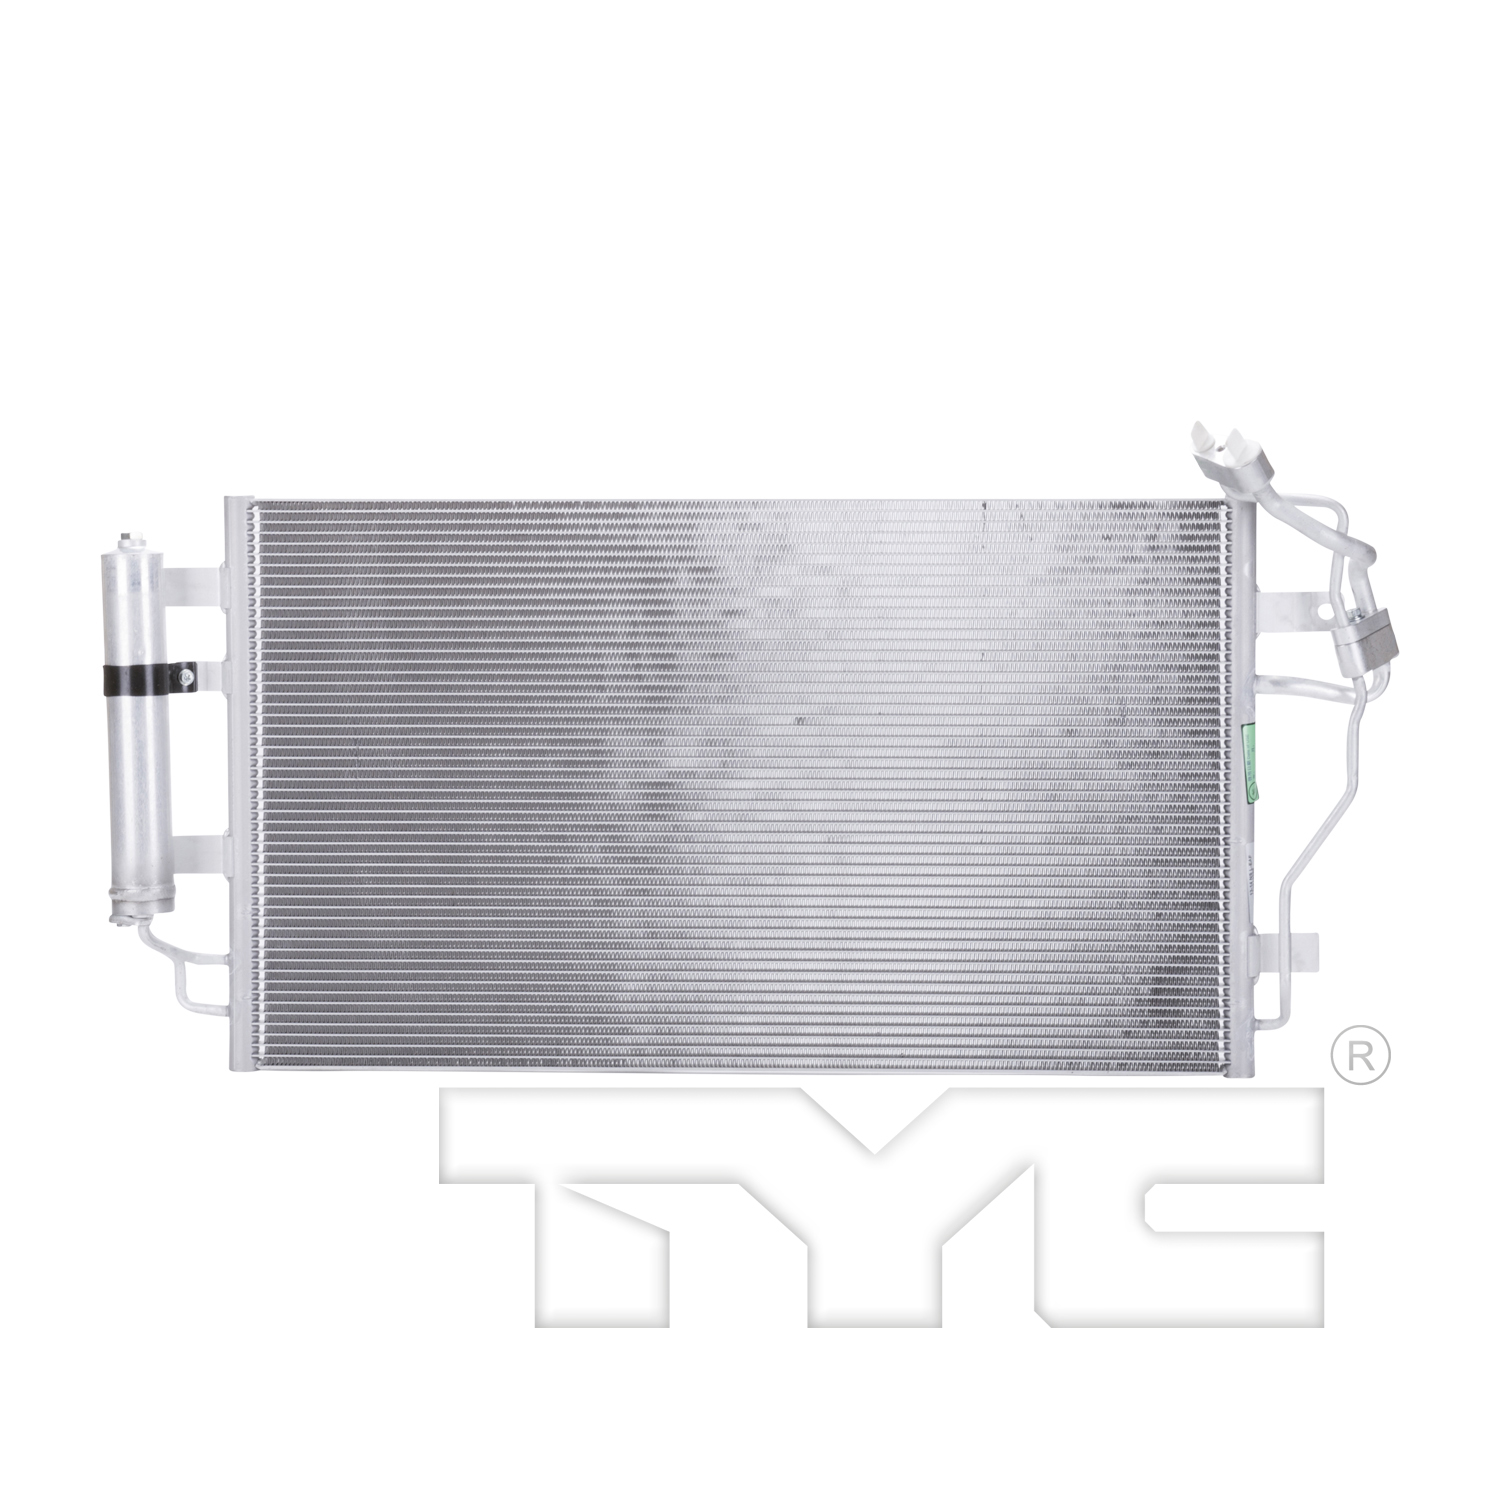 Aftermarket AC CONDENSERS for NISSAN - LEAF, LEAF,13-16,Air conditioning condenser